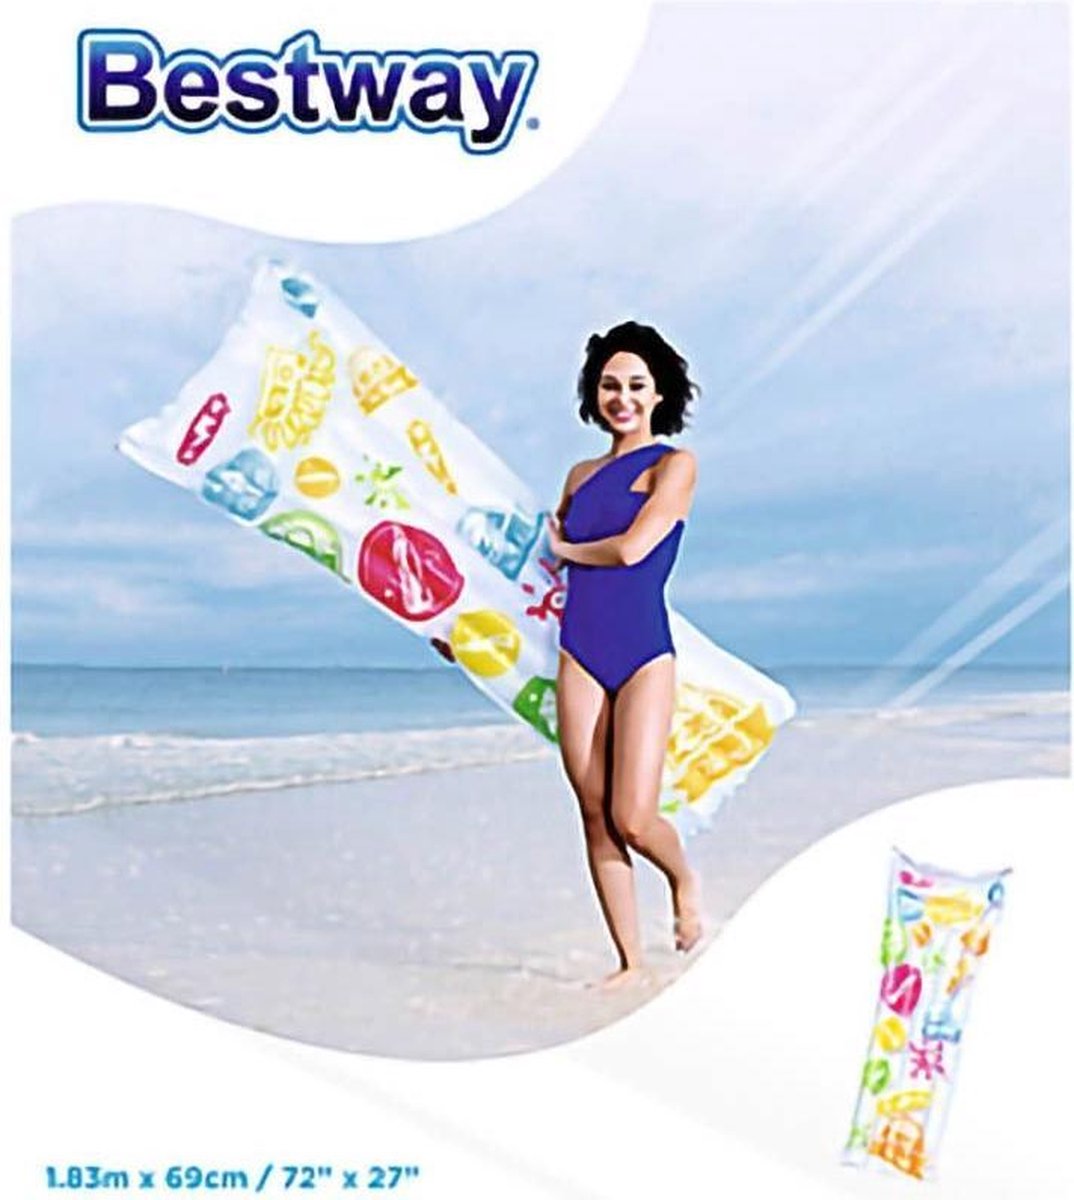 Bestway Luchtbed Multicolor 183 X 69 Cm (random levering)